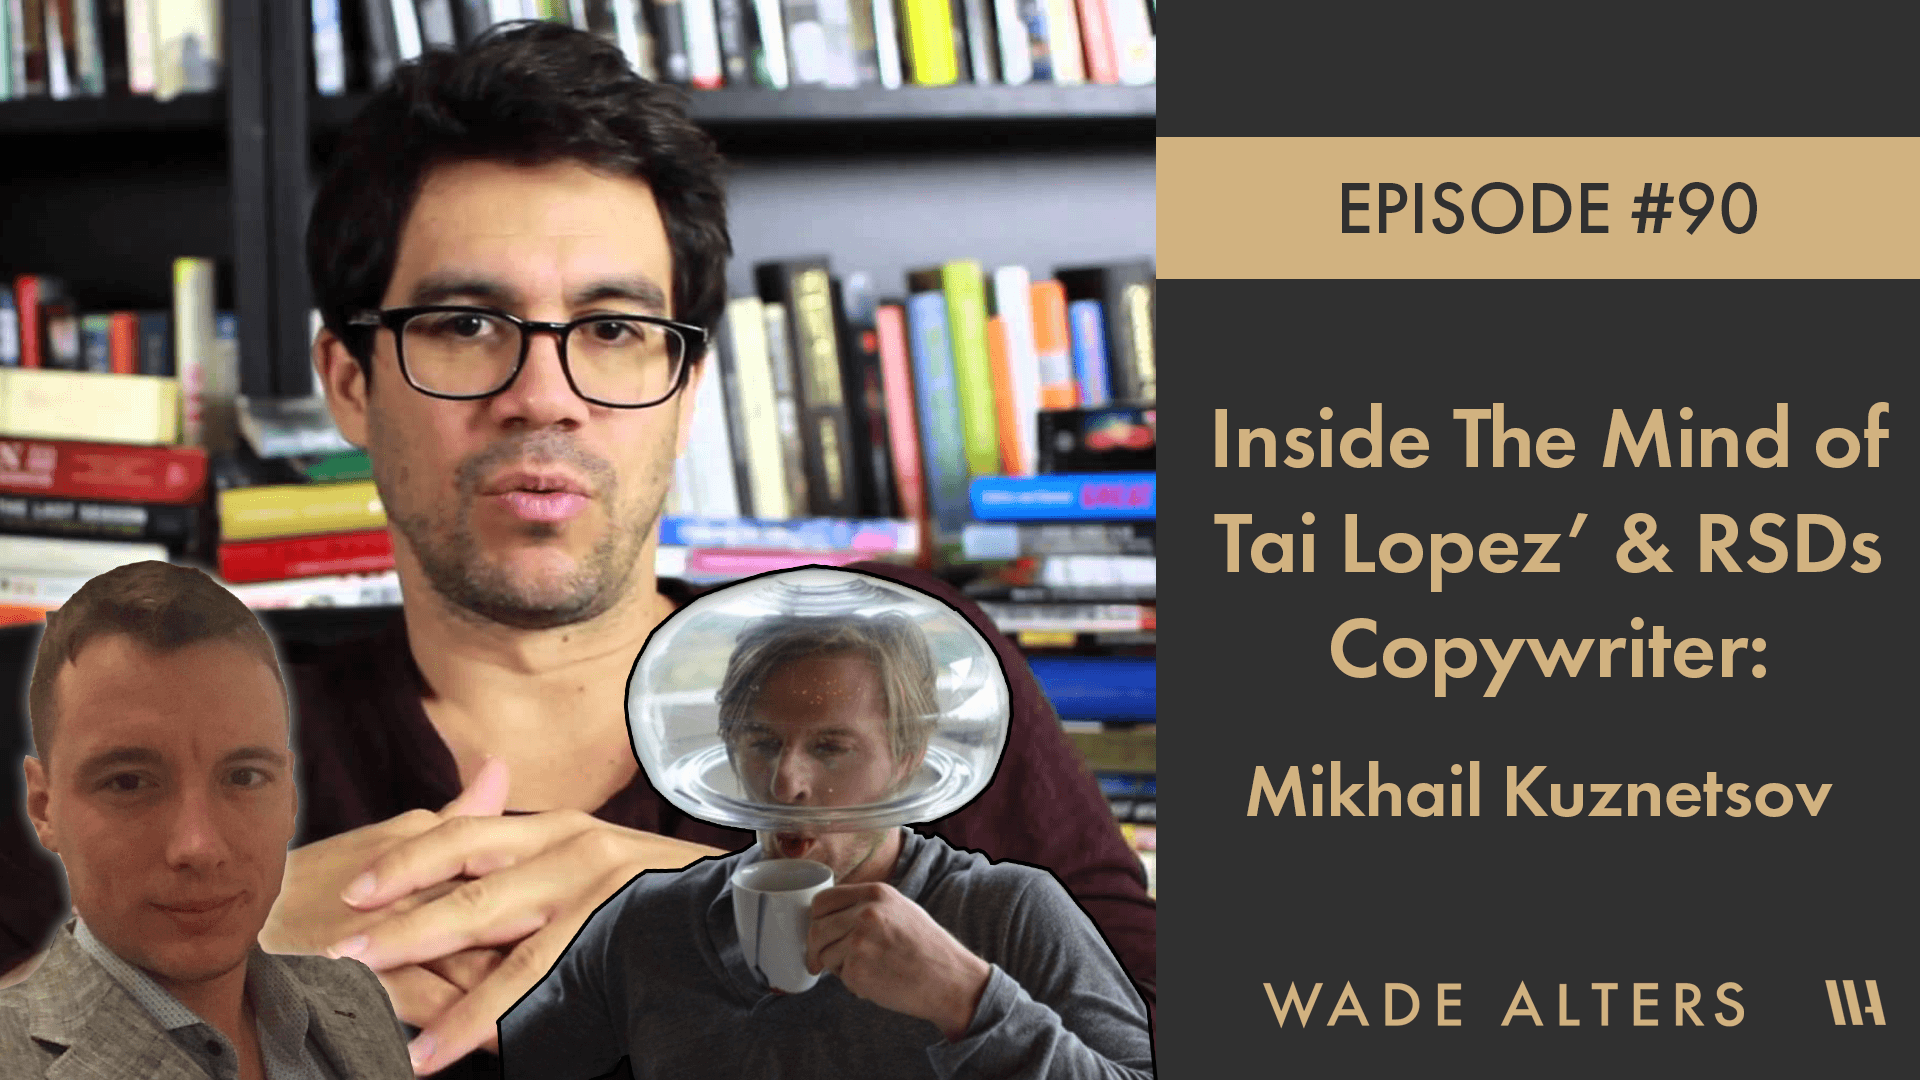 You are currently viewing Inside The Mind of Tai Lopez’s Copywriter: Mikhail Kuznetsov